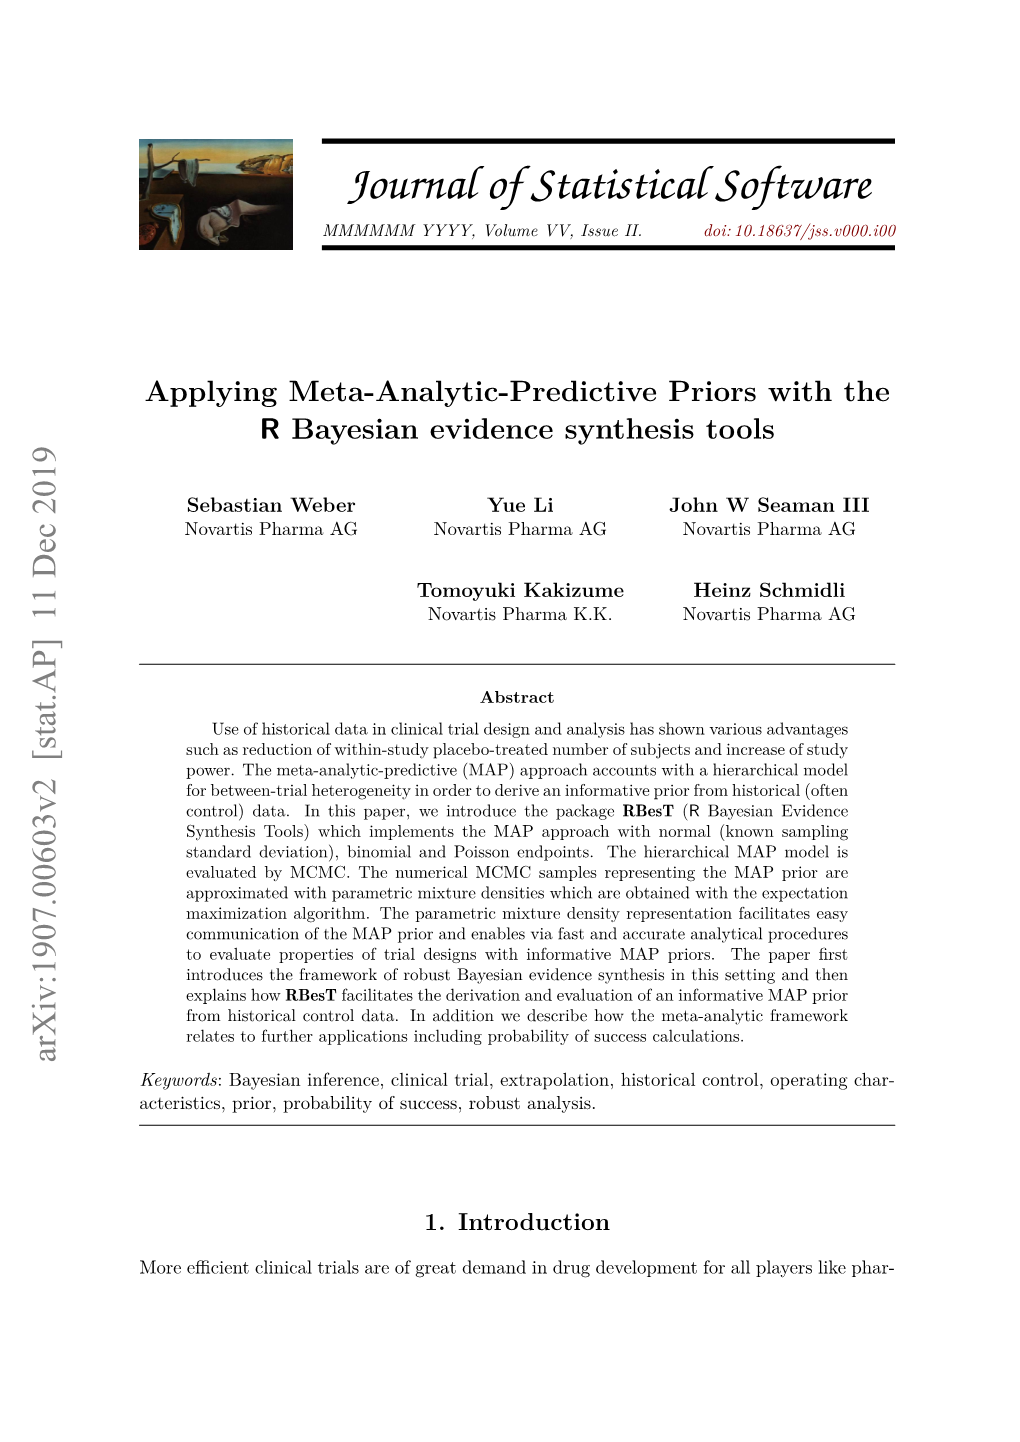 Applying Meta-Analytic-Predictive Priors with the R Bayesian Evidence Synthesis Tools